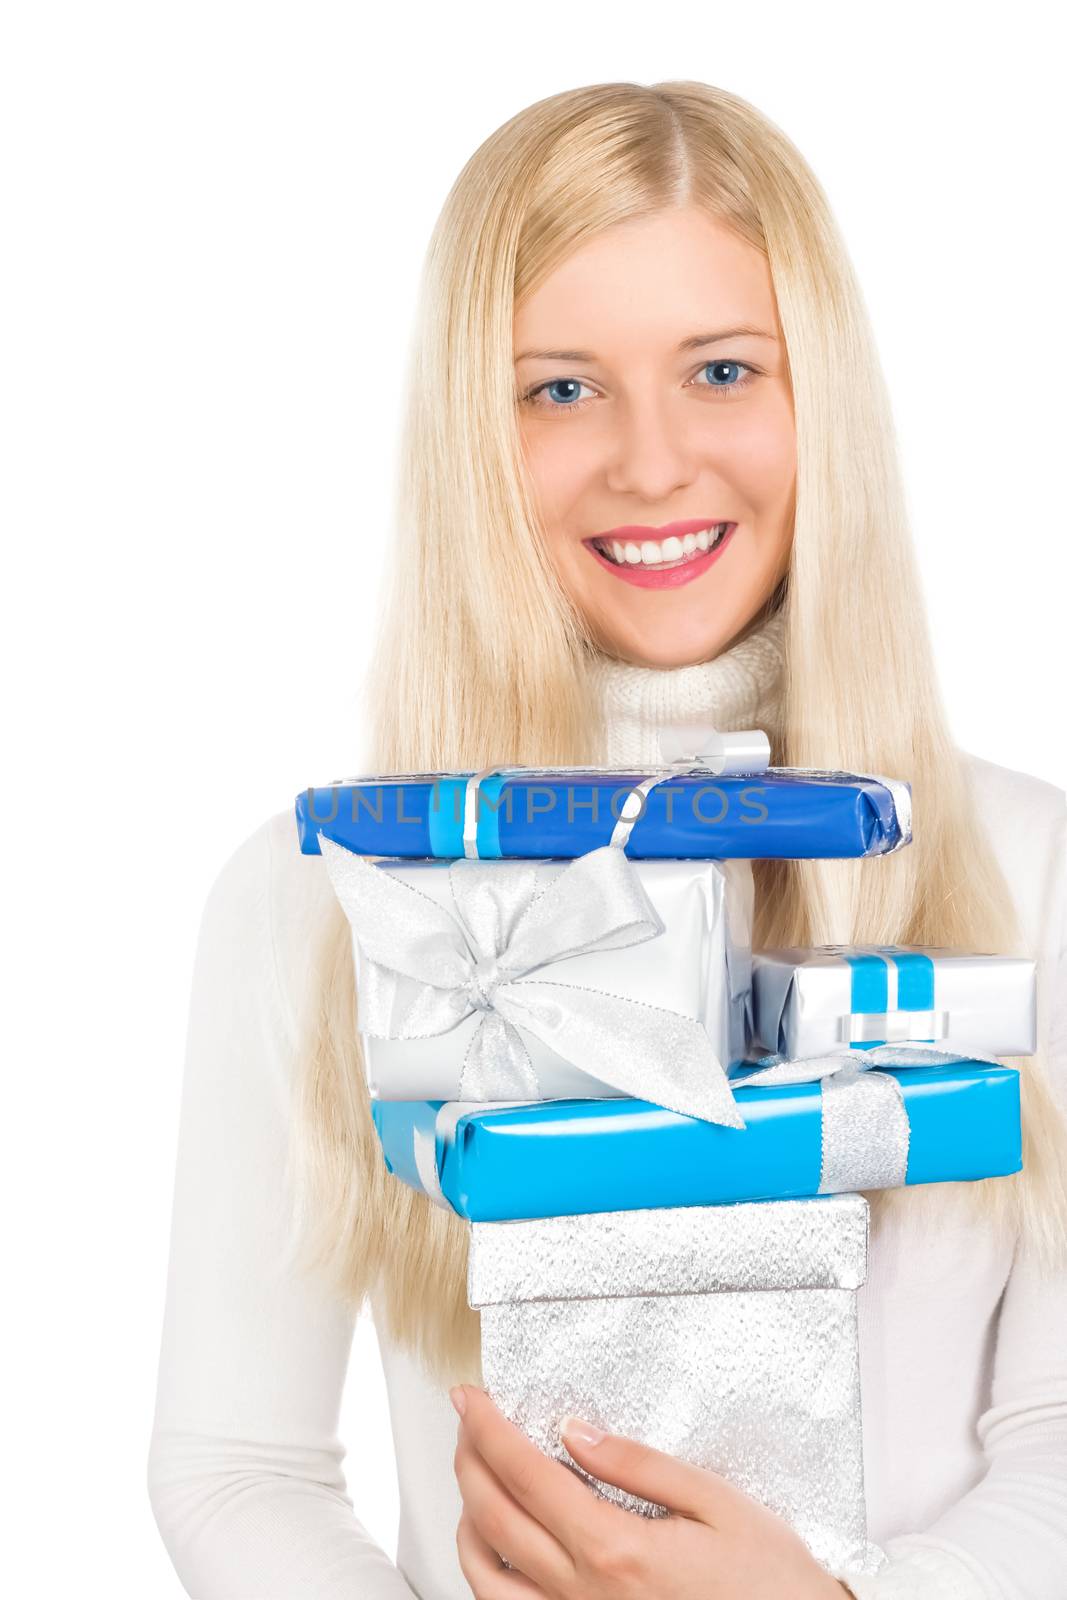 Blonde girl with gift boxes in Christmas, woman and presents in  by Anneleven